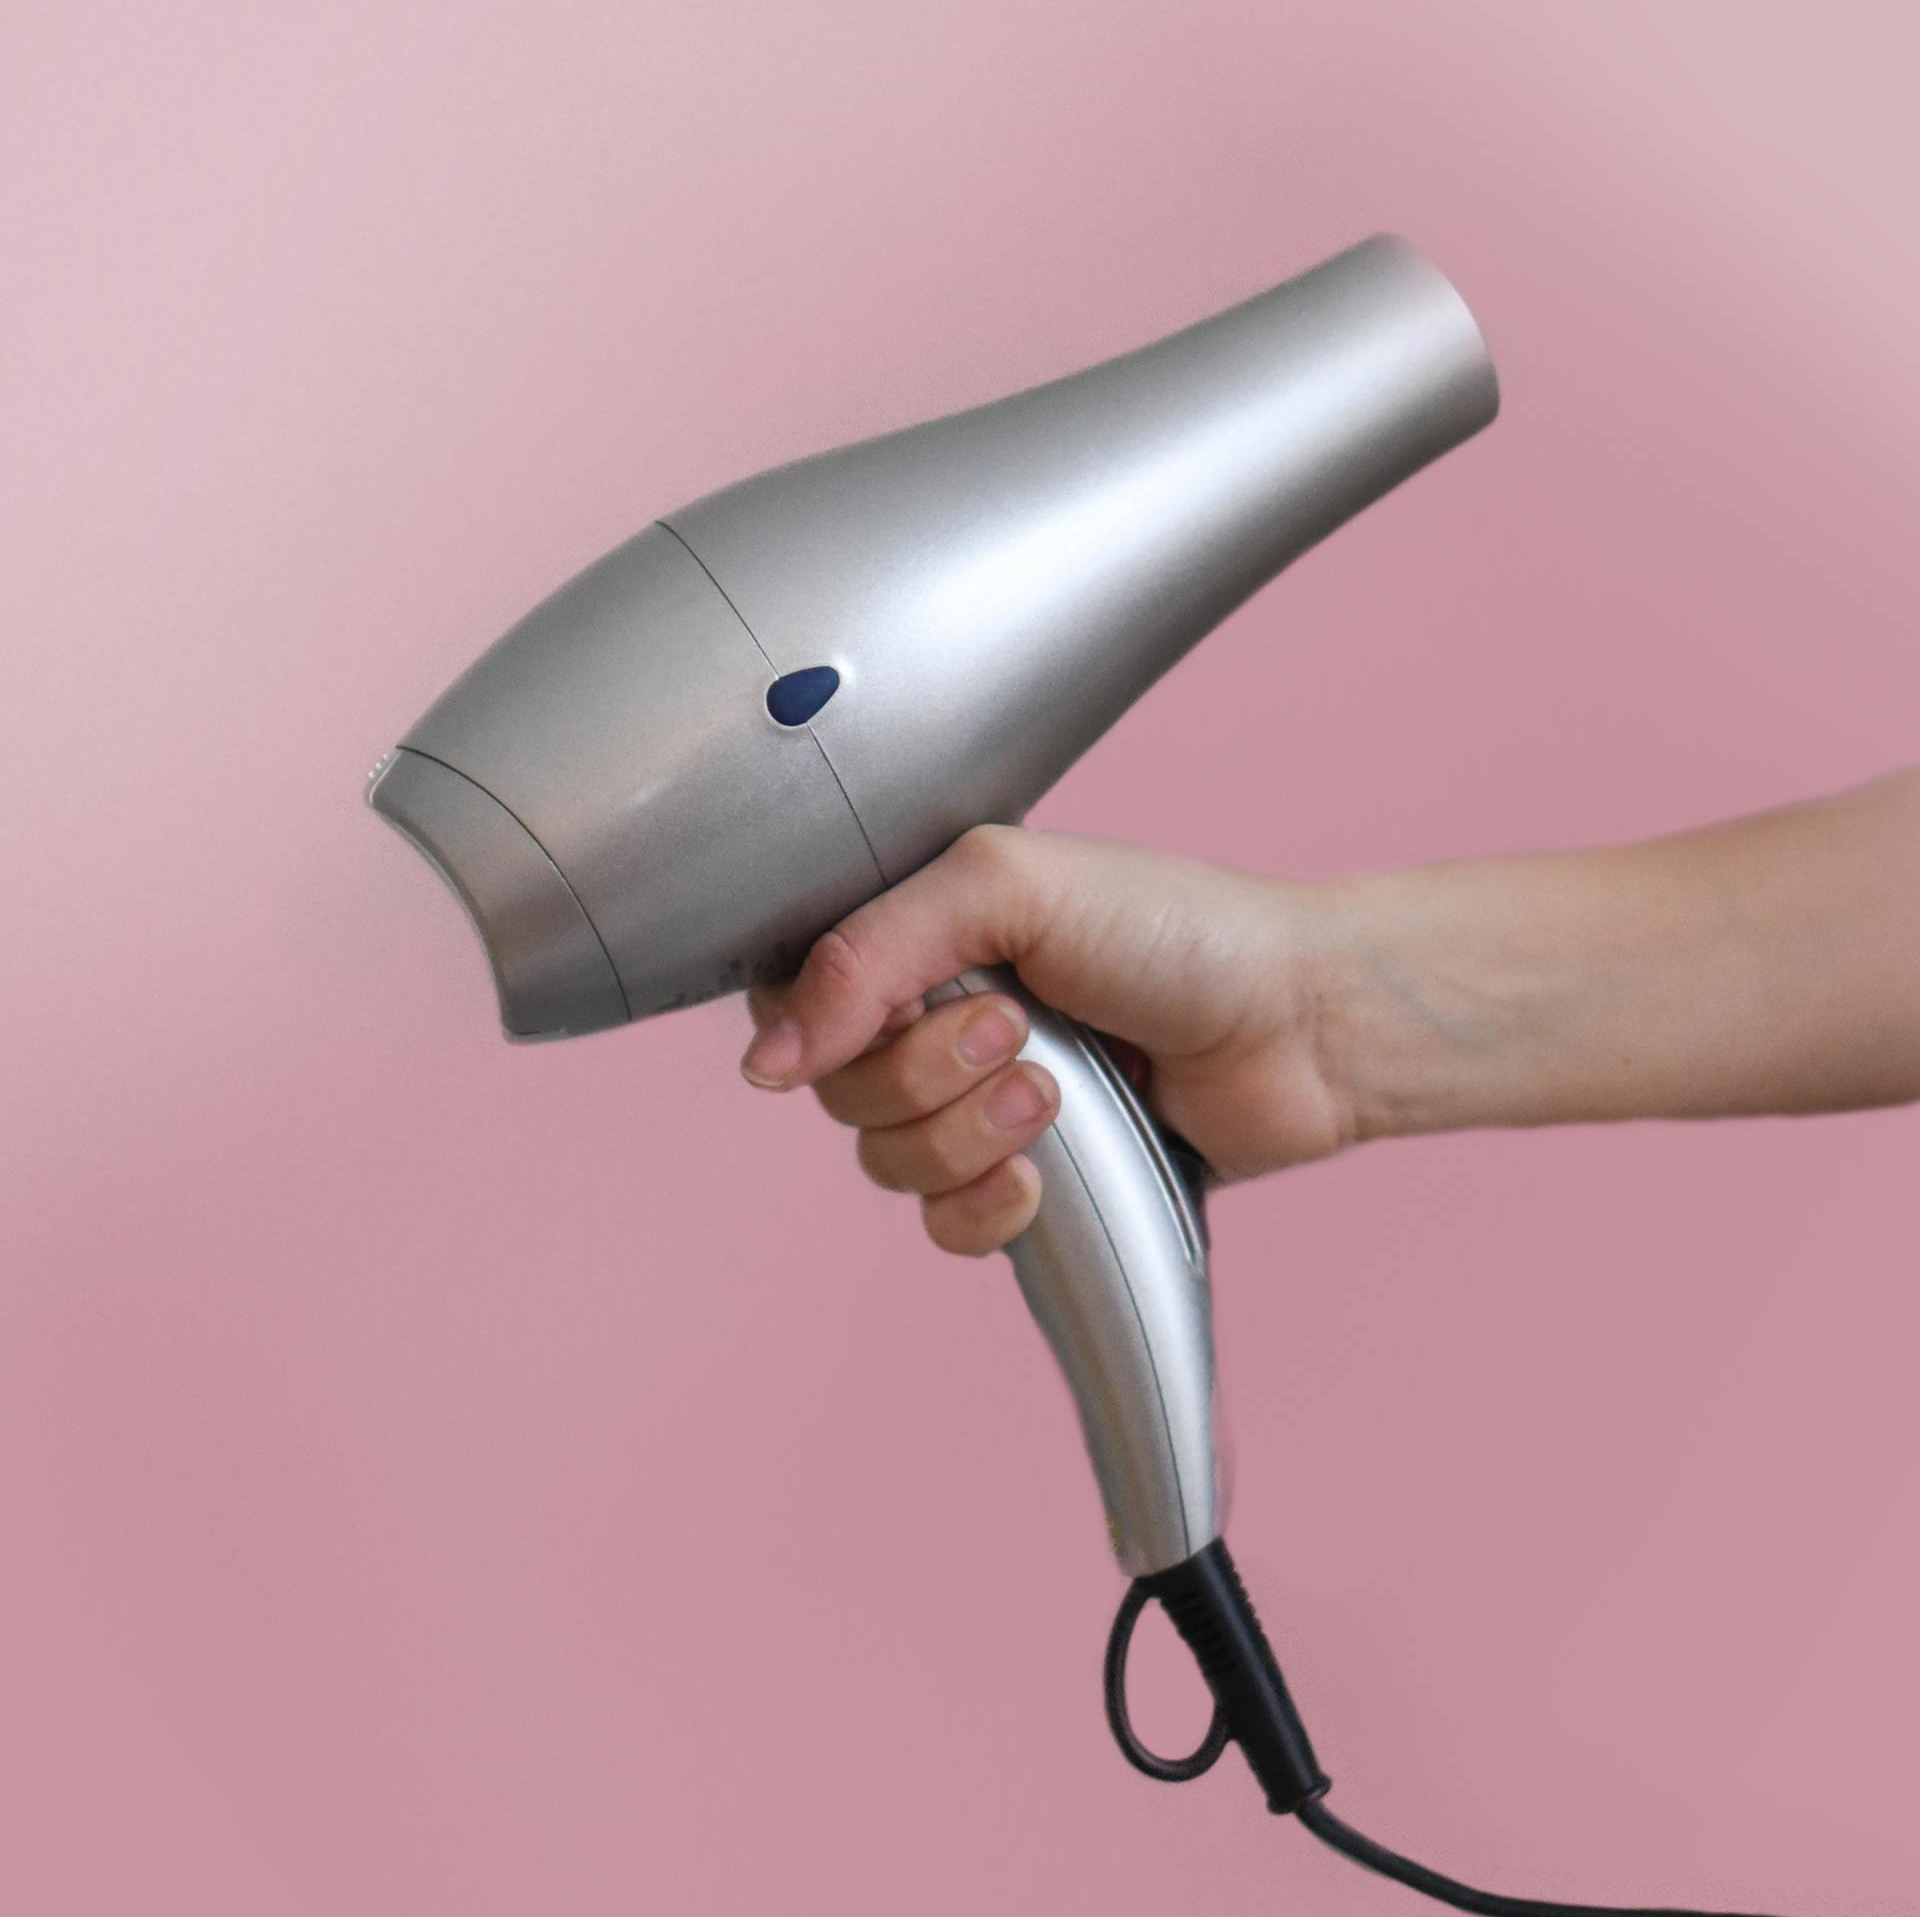 a person is holding a hair dryer in their hand against a pink background .